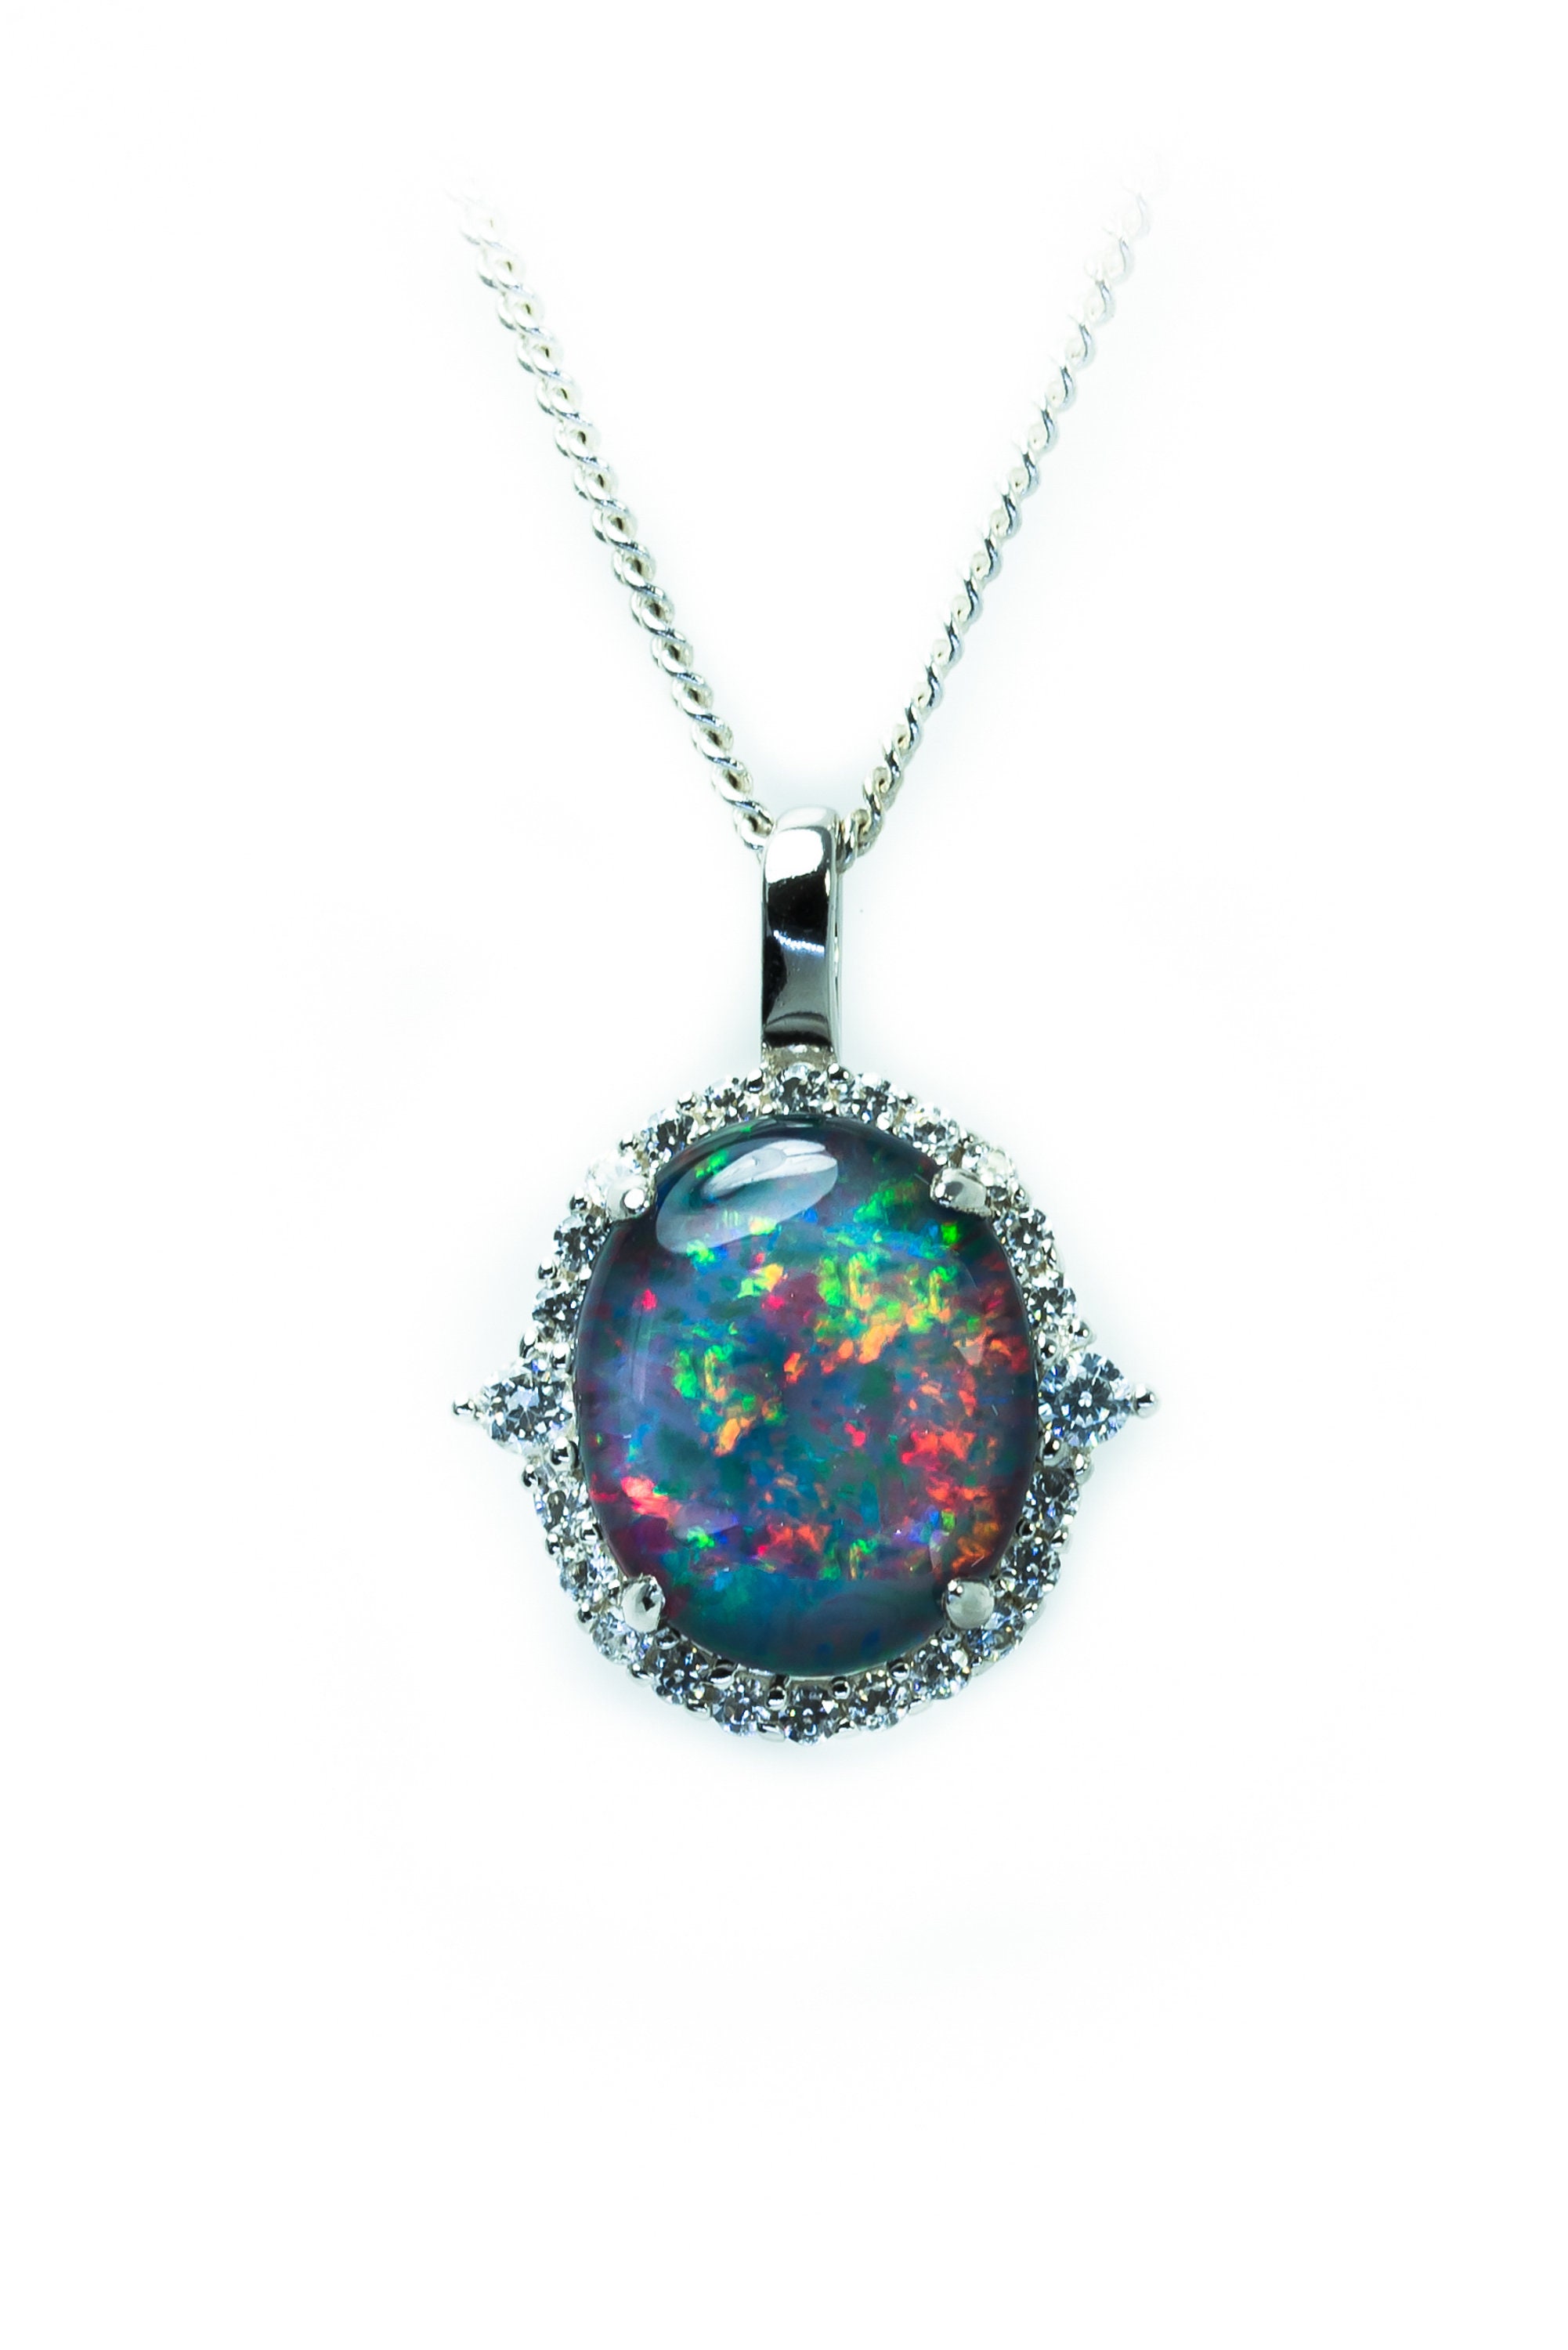 FOREVER WITH ME 14KT YELLOW GOLD & DIAMOND AUSTRALIAN SOLID CRYSTAL BOULDER OPAL  NECKLACE